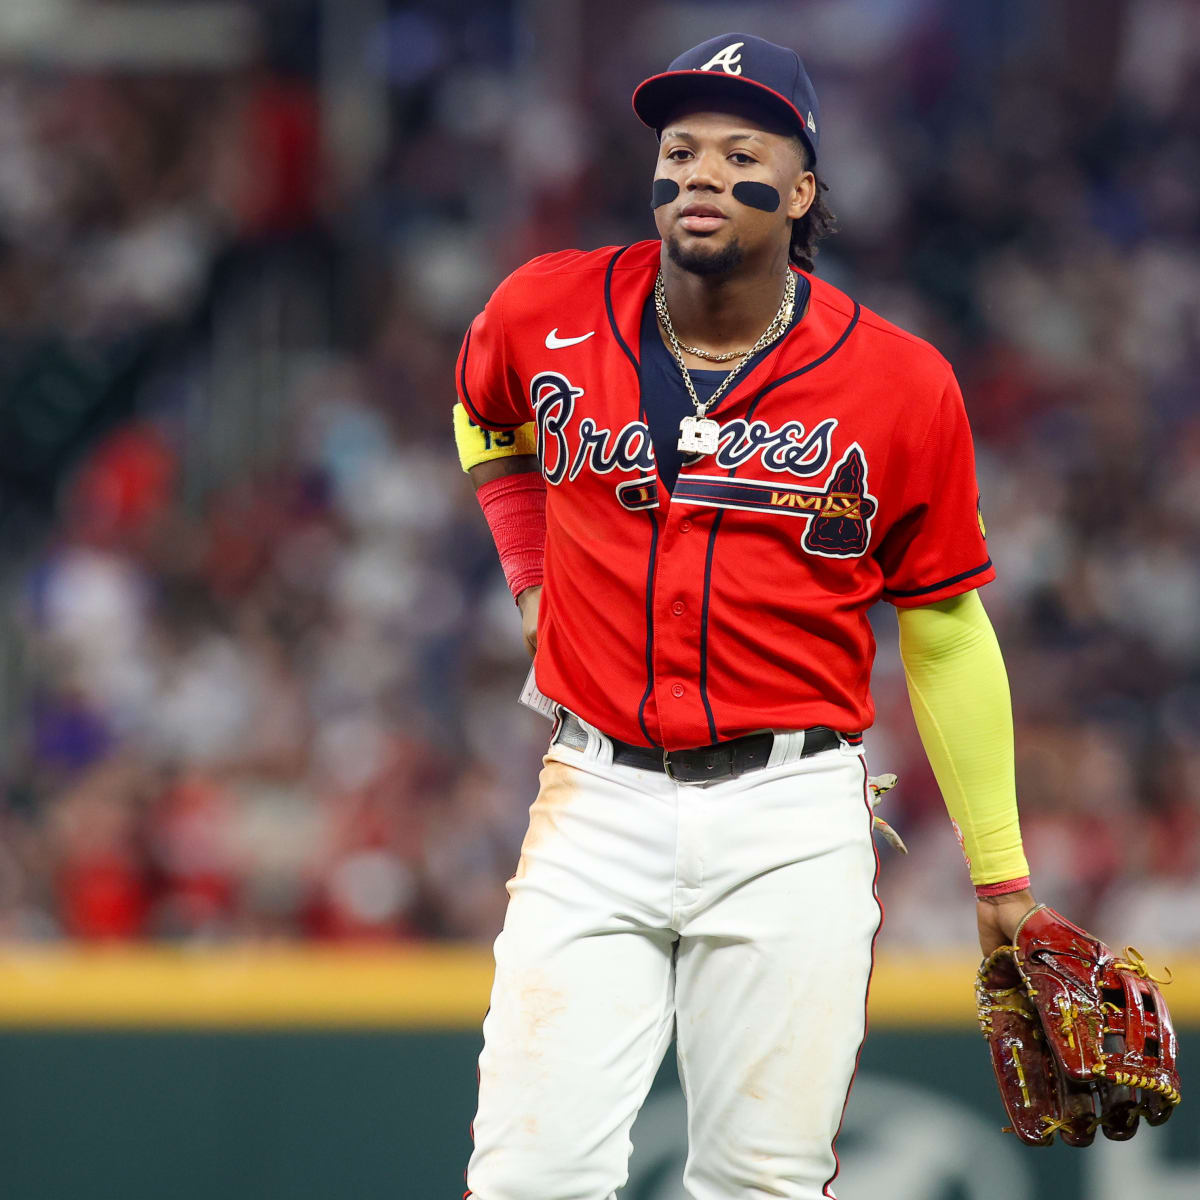 Ronald Acuña Jr. fends off fans on field during Braves-Rockies game